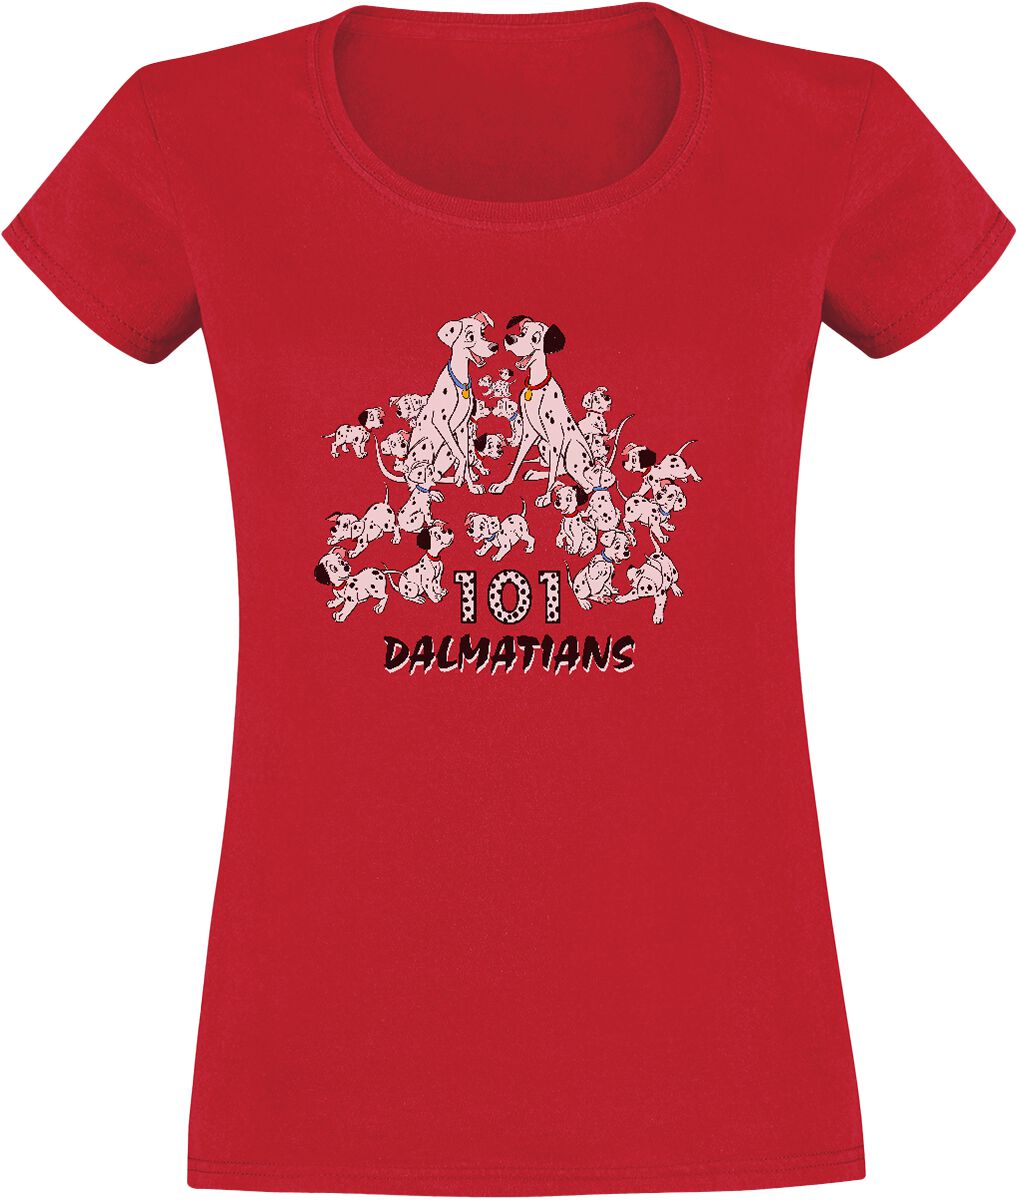 One Hundred And One Dalmatians Dalmatian Group T-Shirt red